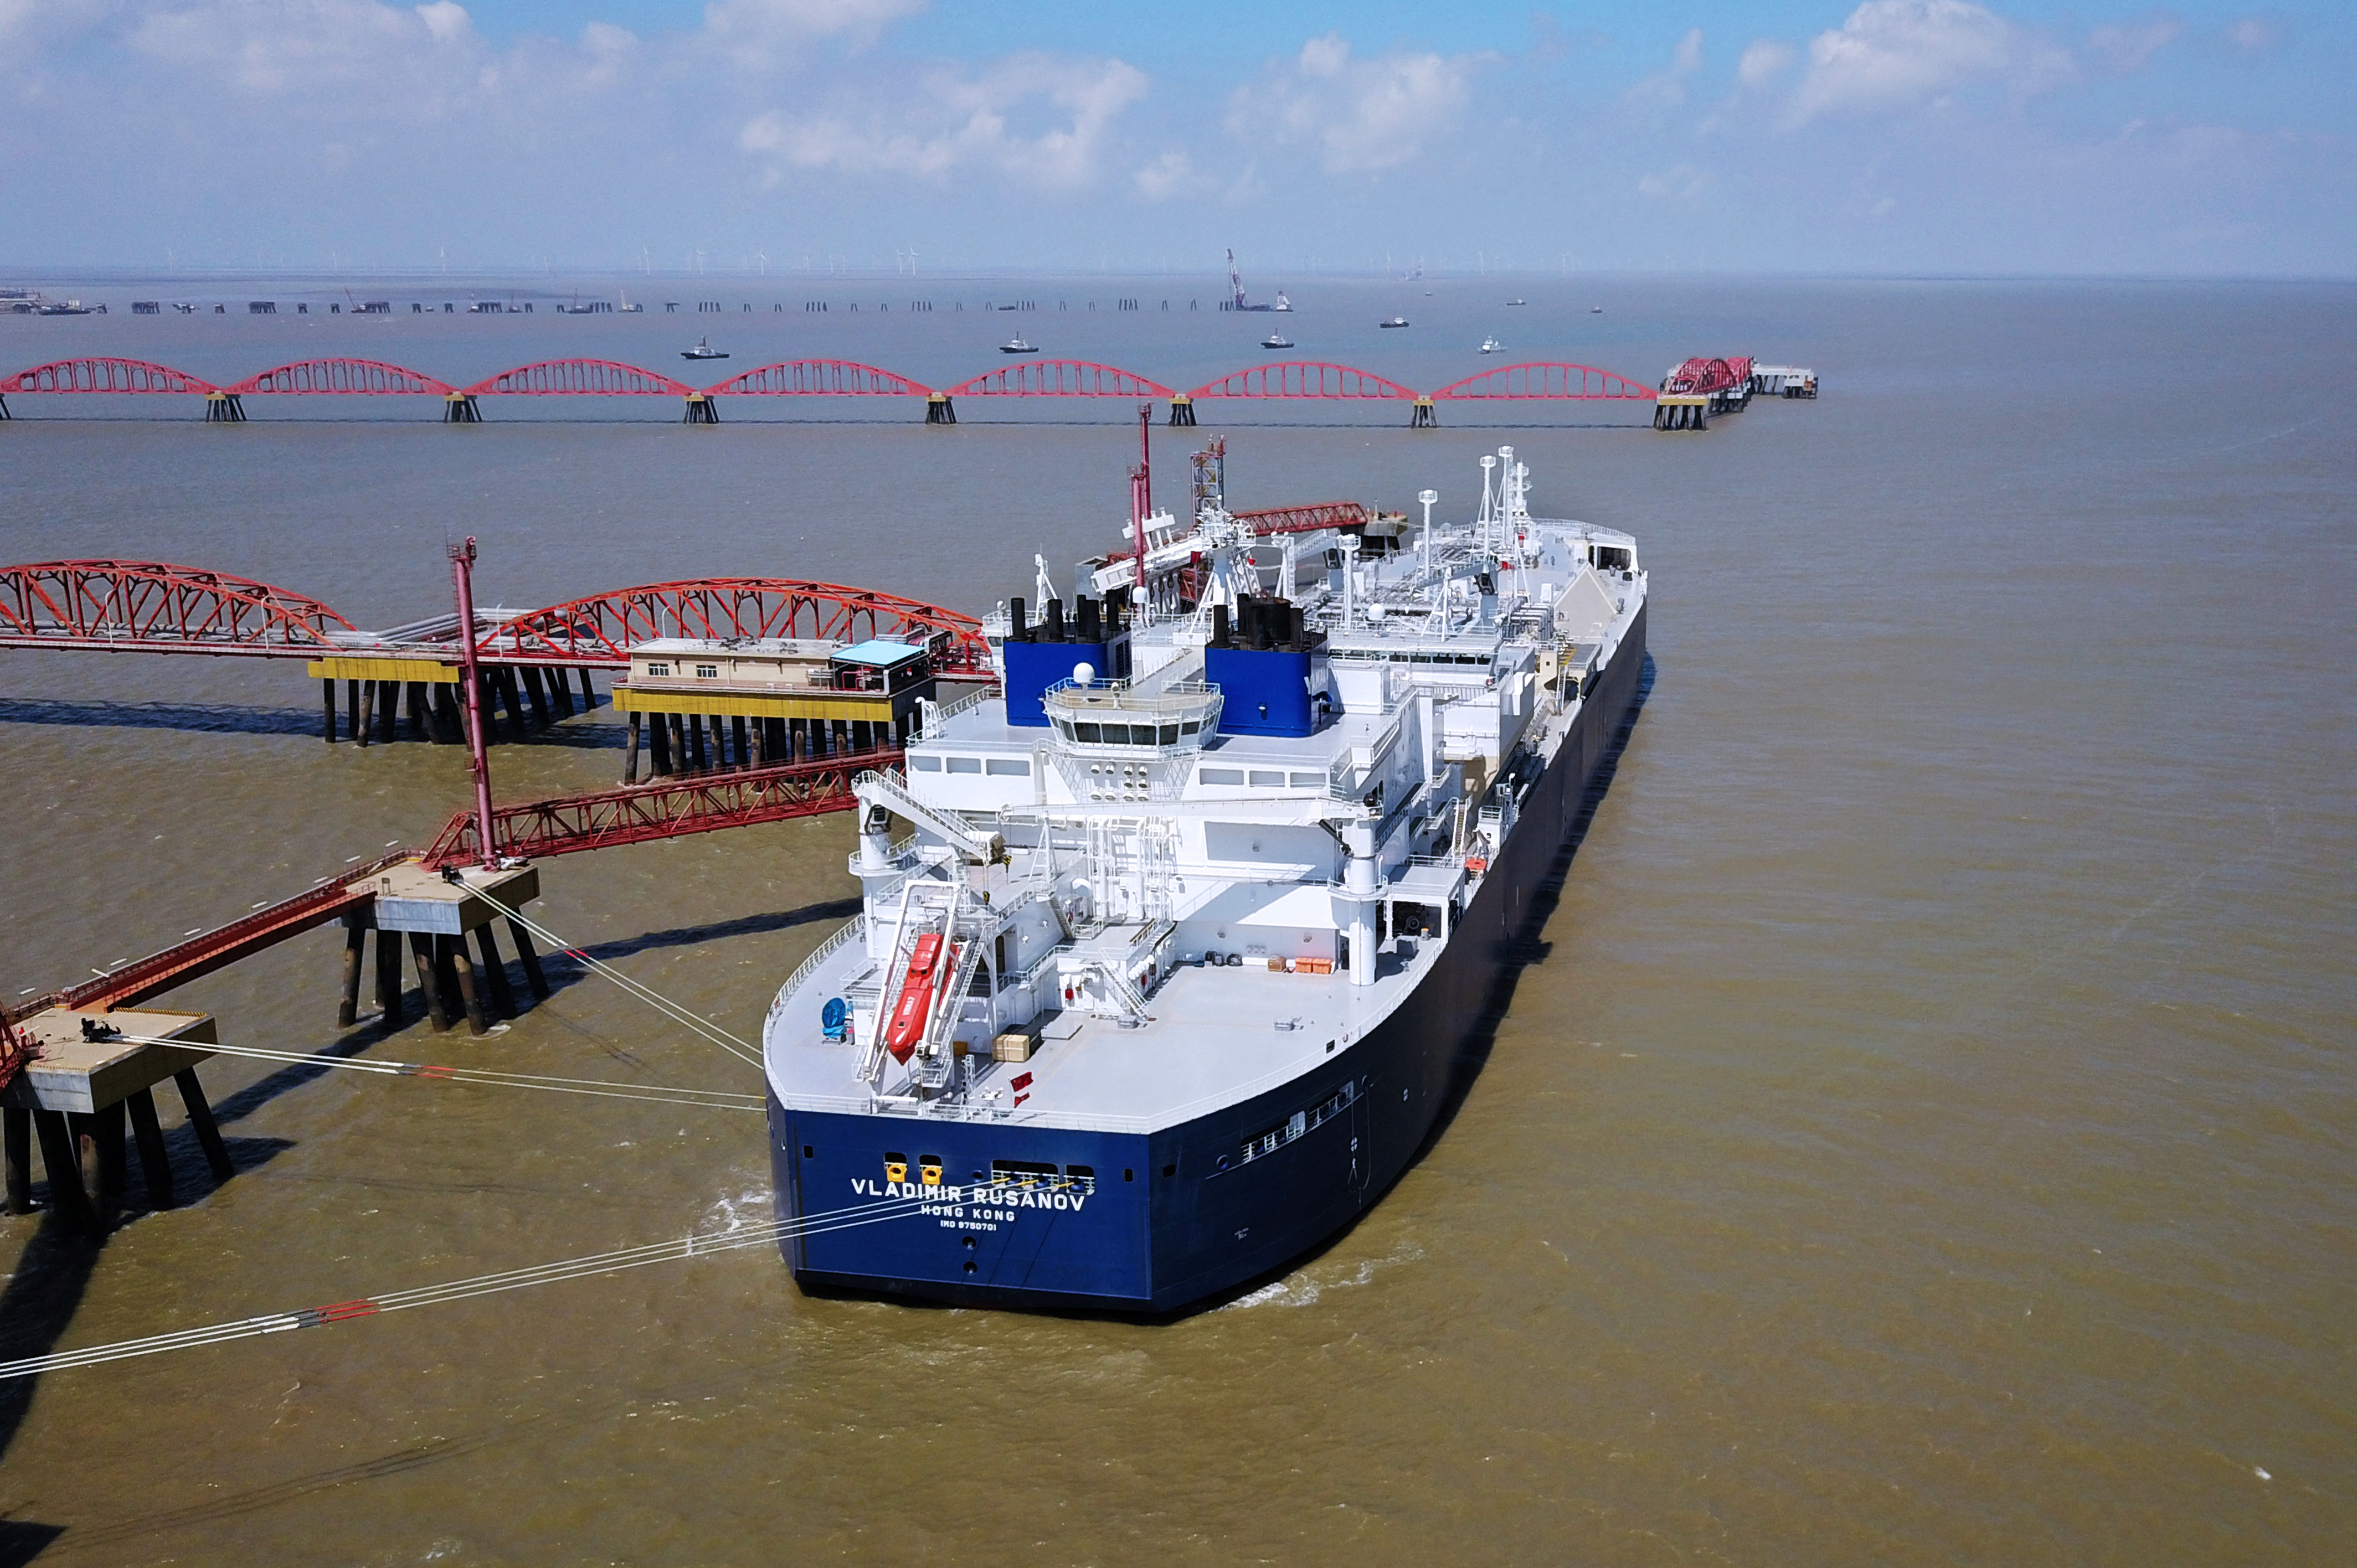 Vessel carrying liquefied natural gas cargo from Russia's Yamal LNG project, is seen at Rudong LNG Terminal in Nantong, Jiangsu